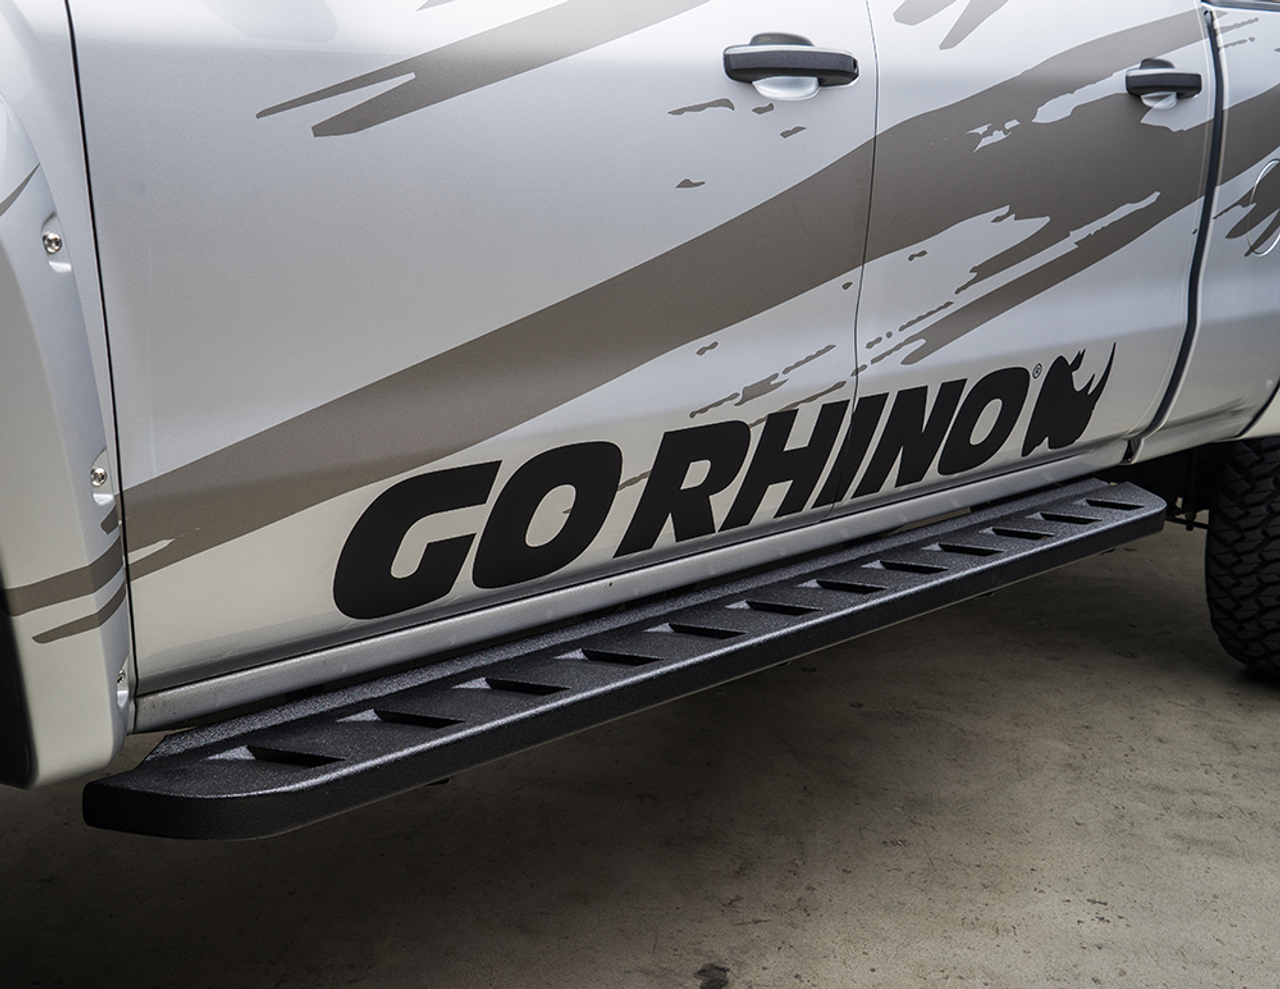 Go Rhino 63415587T Ford, F-250, F-350, 2017 - 2021, RB10 Running boards - Complete Kit: RB10 Running boards + Brackets, Galvanized Steel, Protective Bedliner coating, 630087T RB10 + 6941555 RB Brackets